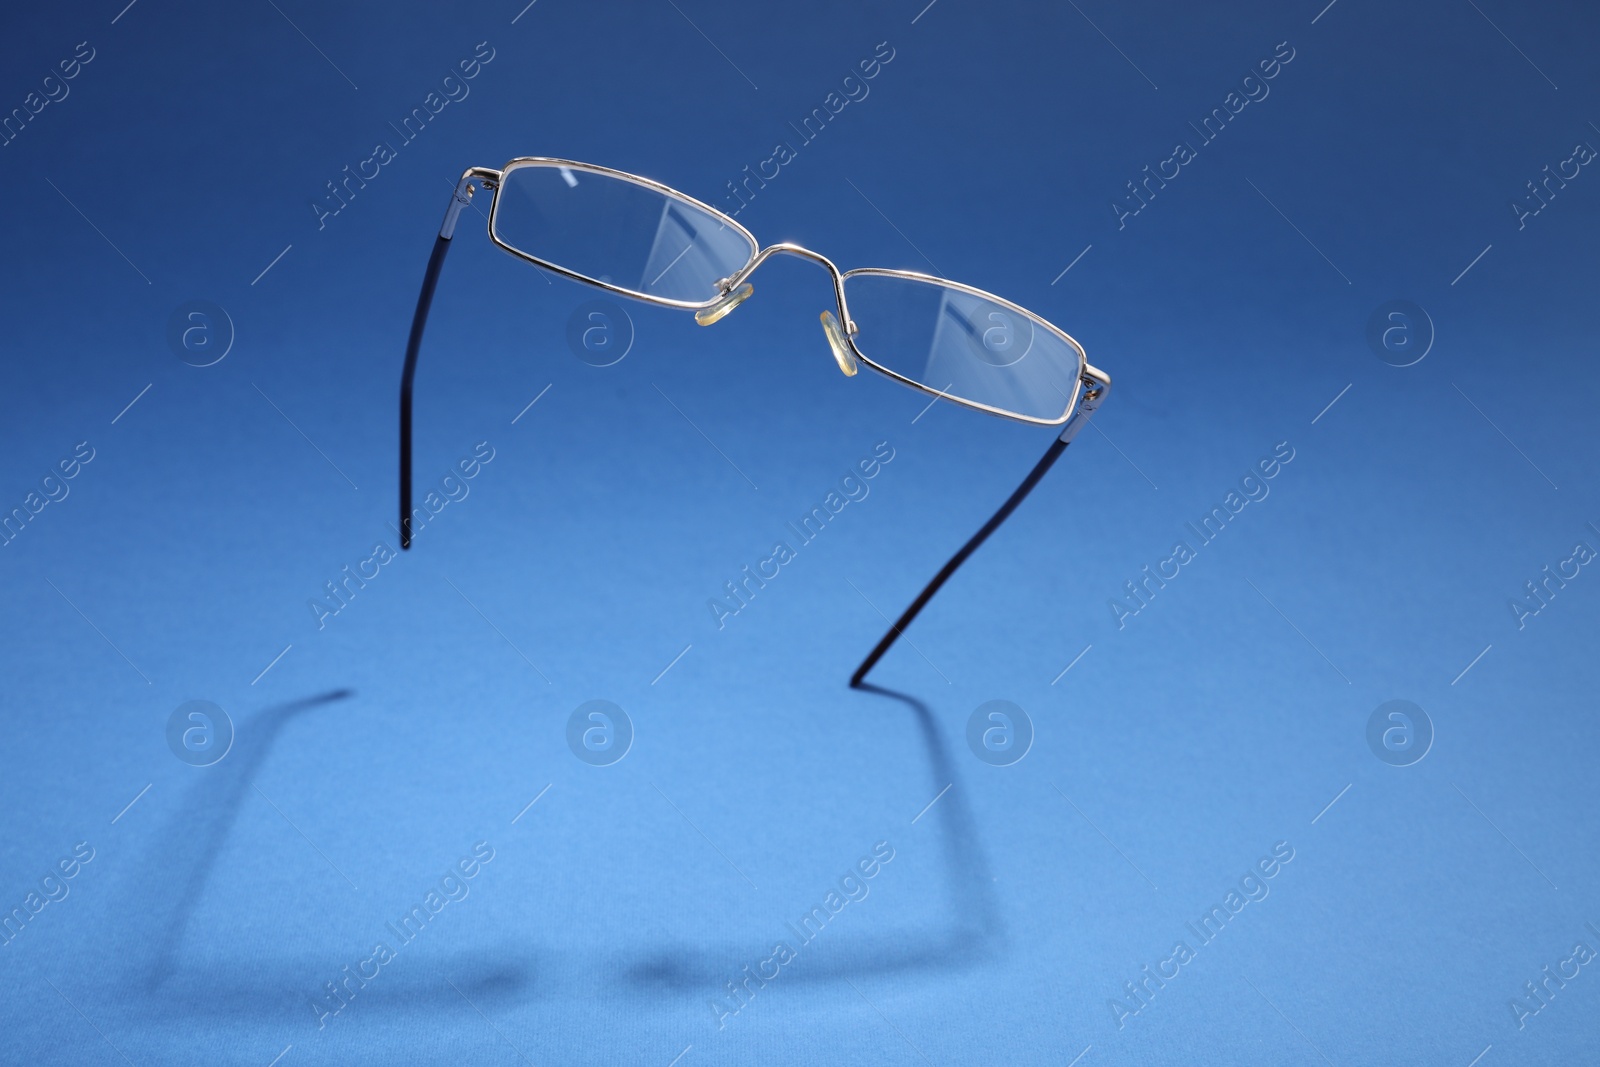 Photo of Stylish pair of glasses with metal frame on blue background, space for text